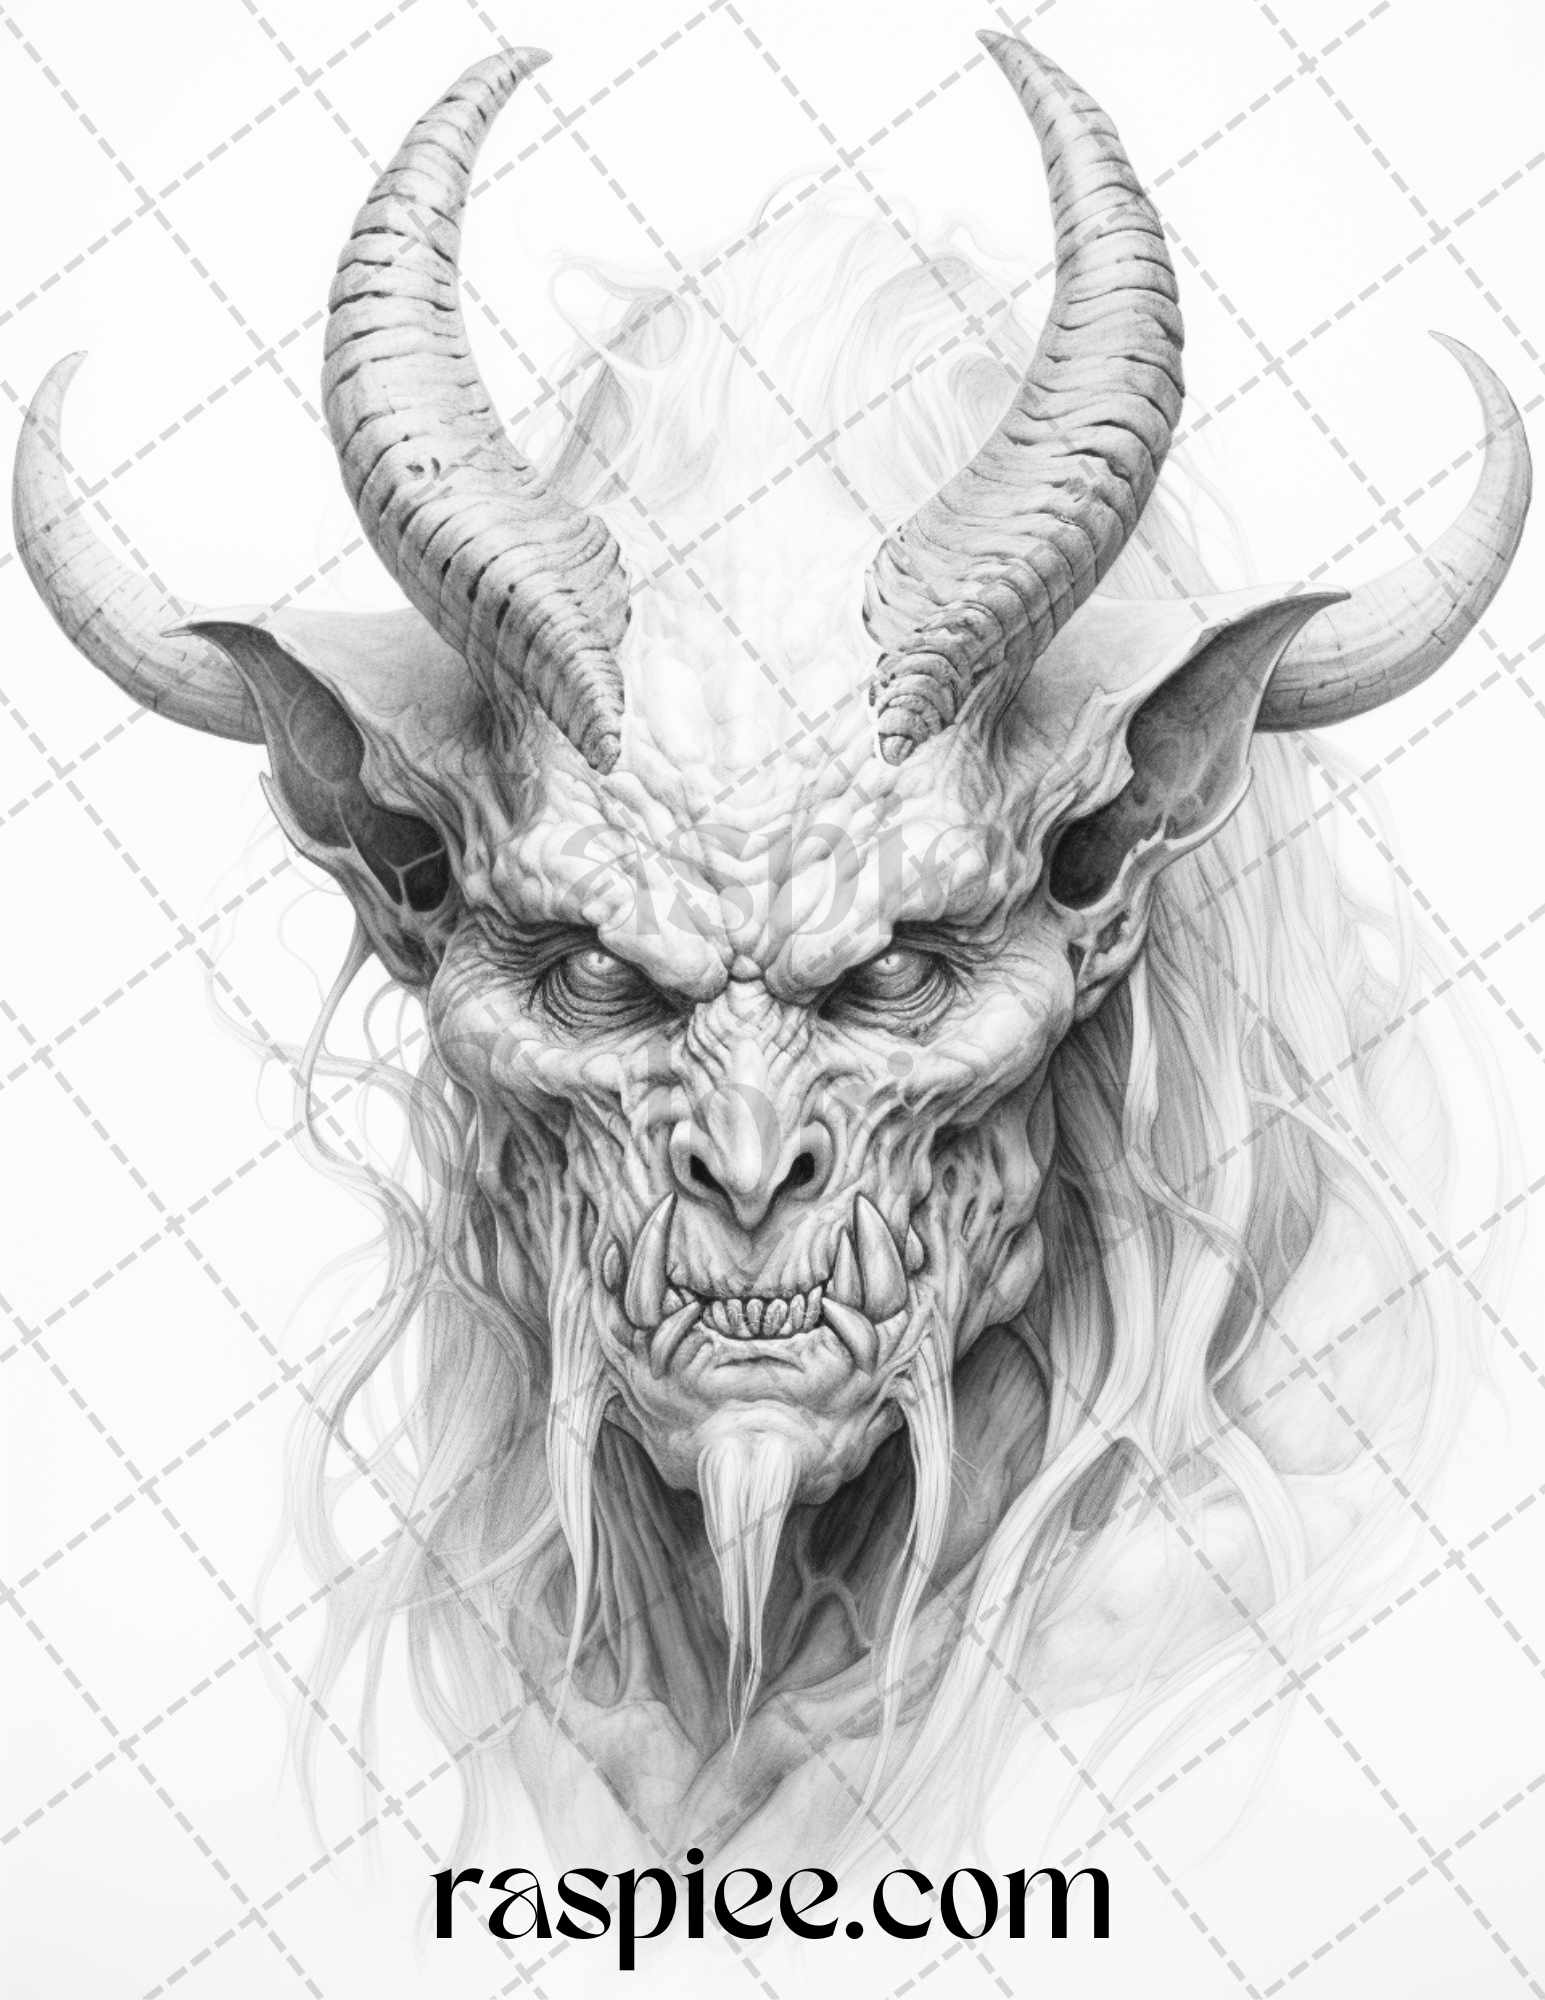 Demon Coloring Pages for Adults, Halloween Coloring Pages for Adults, Halloween Coloring Book Printable, Dark Fantasy Coloring Sheets, Printable Demon Coloring Book, Gothic Fantasy Coloring Collection, Mythical Creatures Coloring Pages